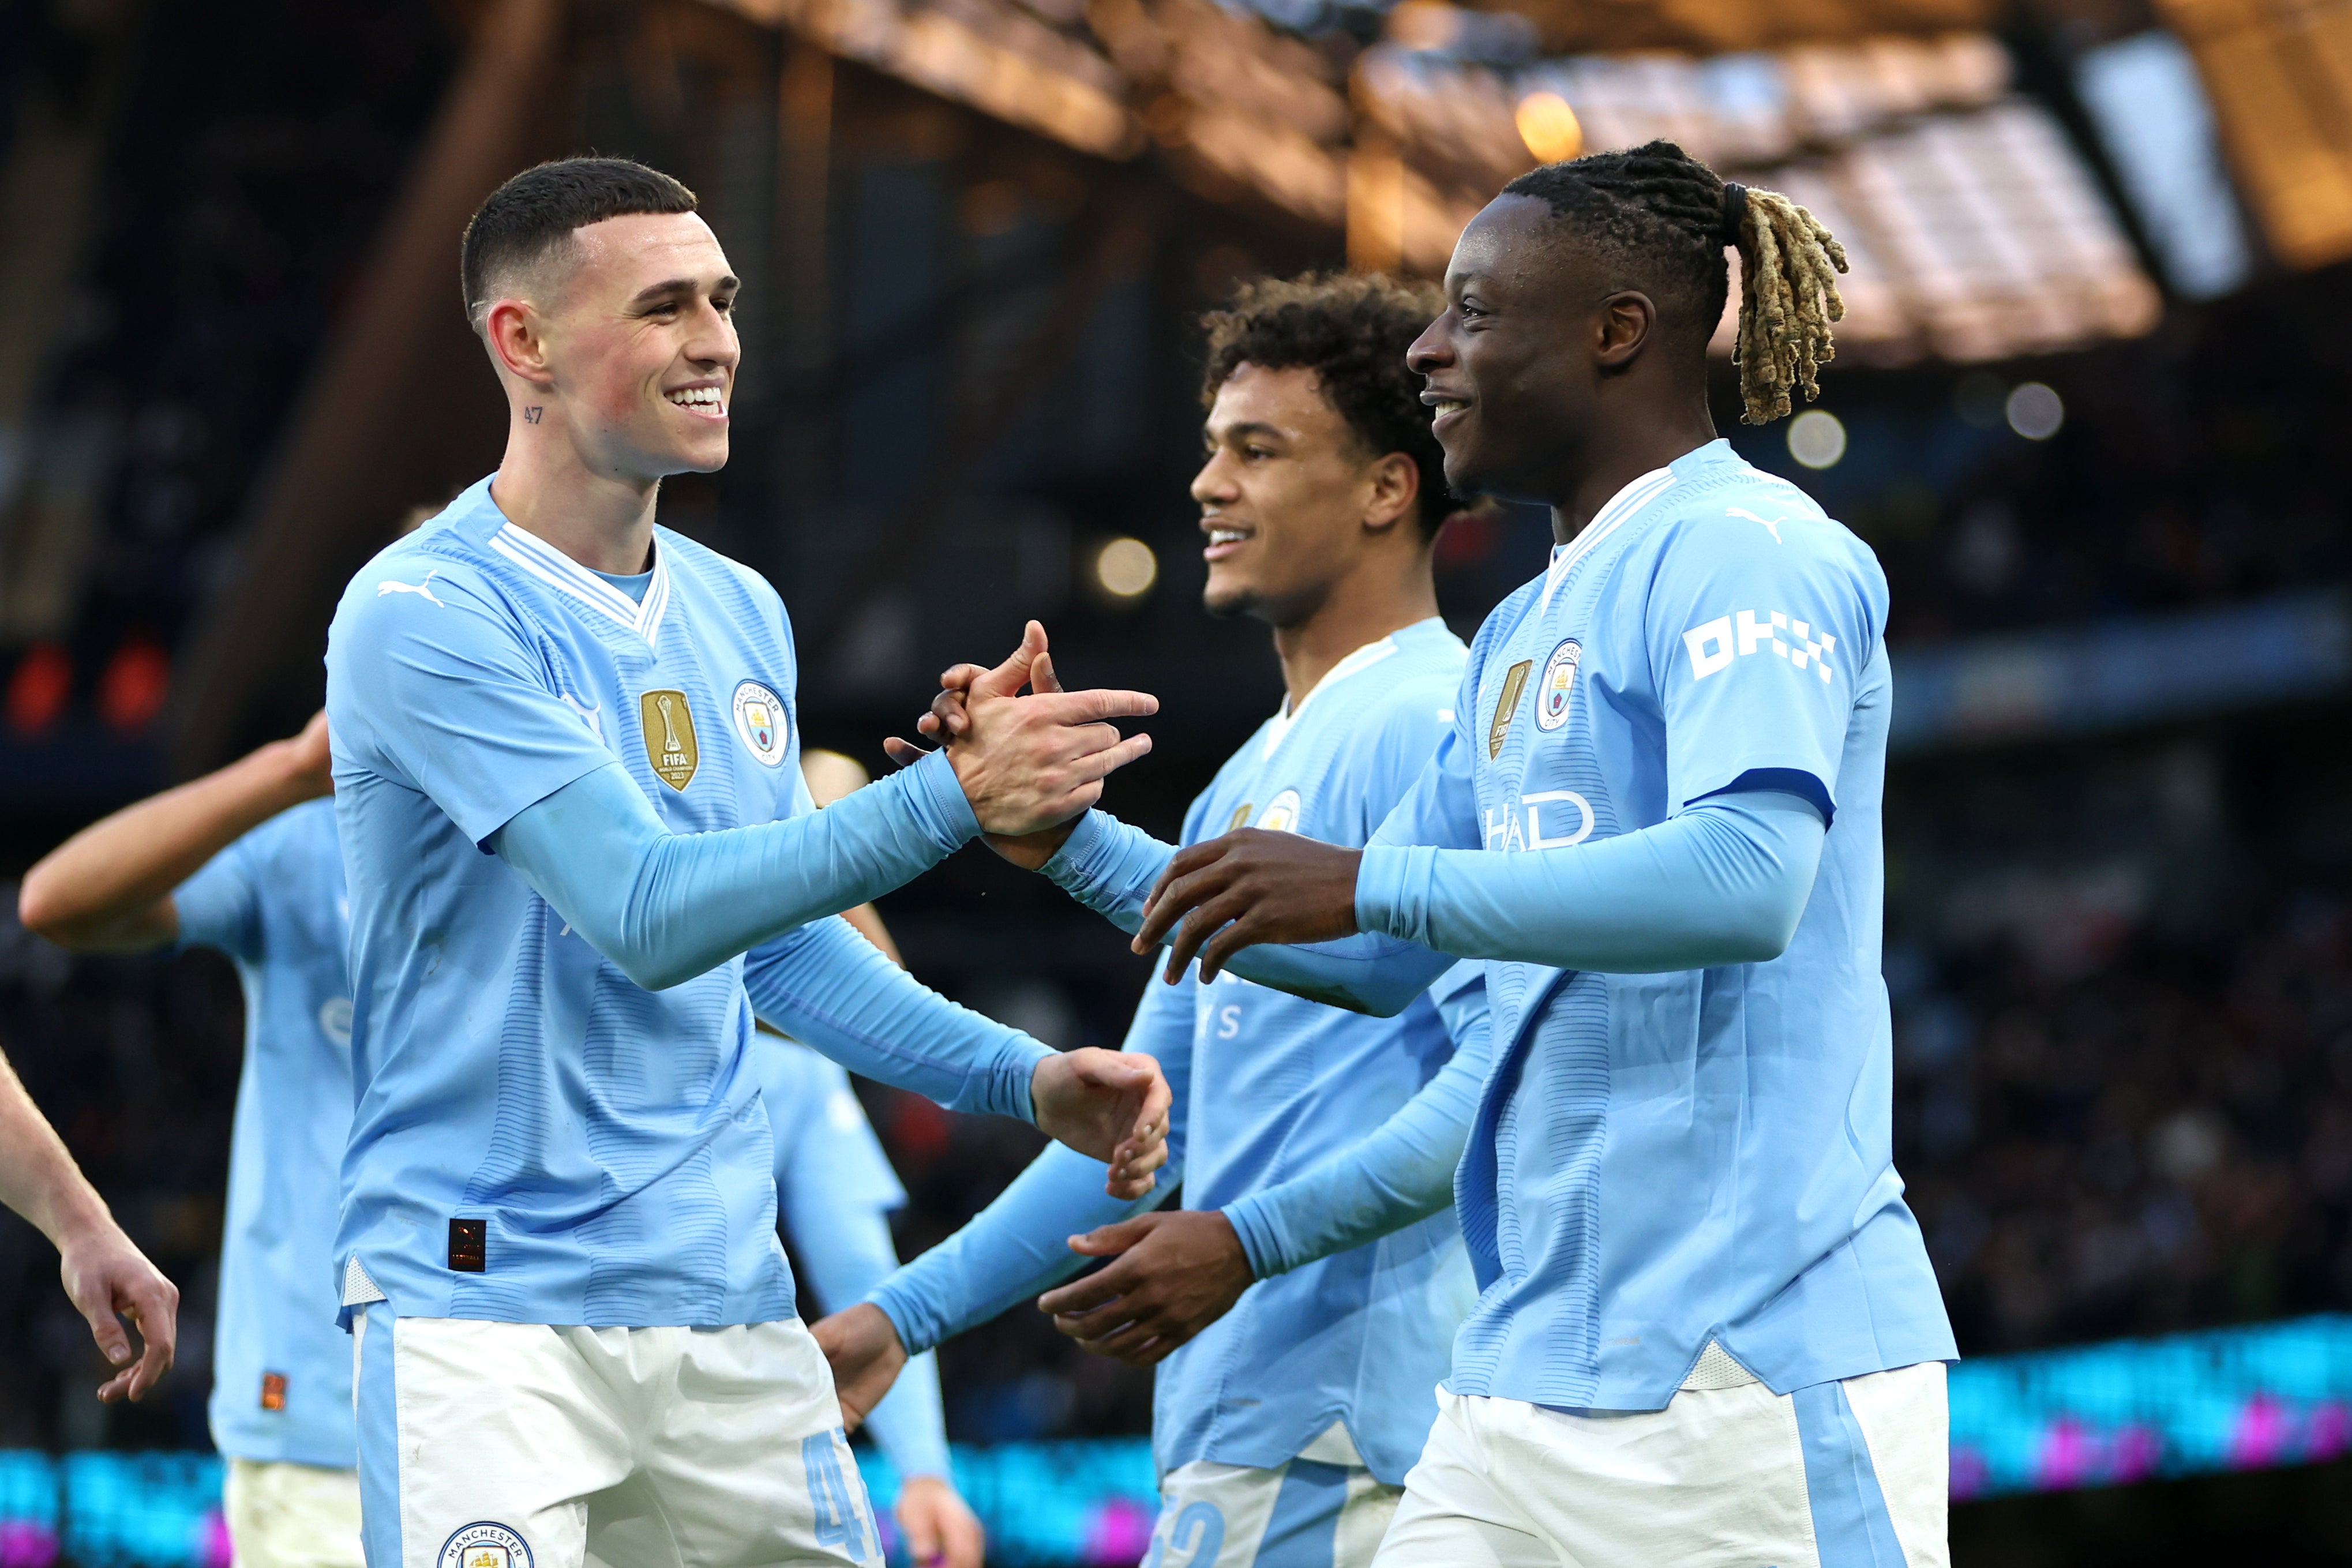 City safely progressed to the FA Cup fourth round